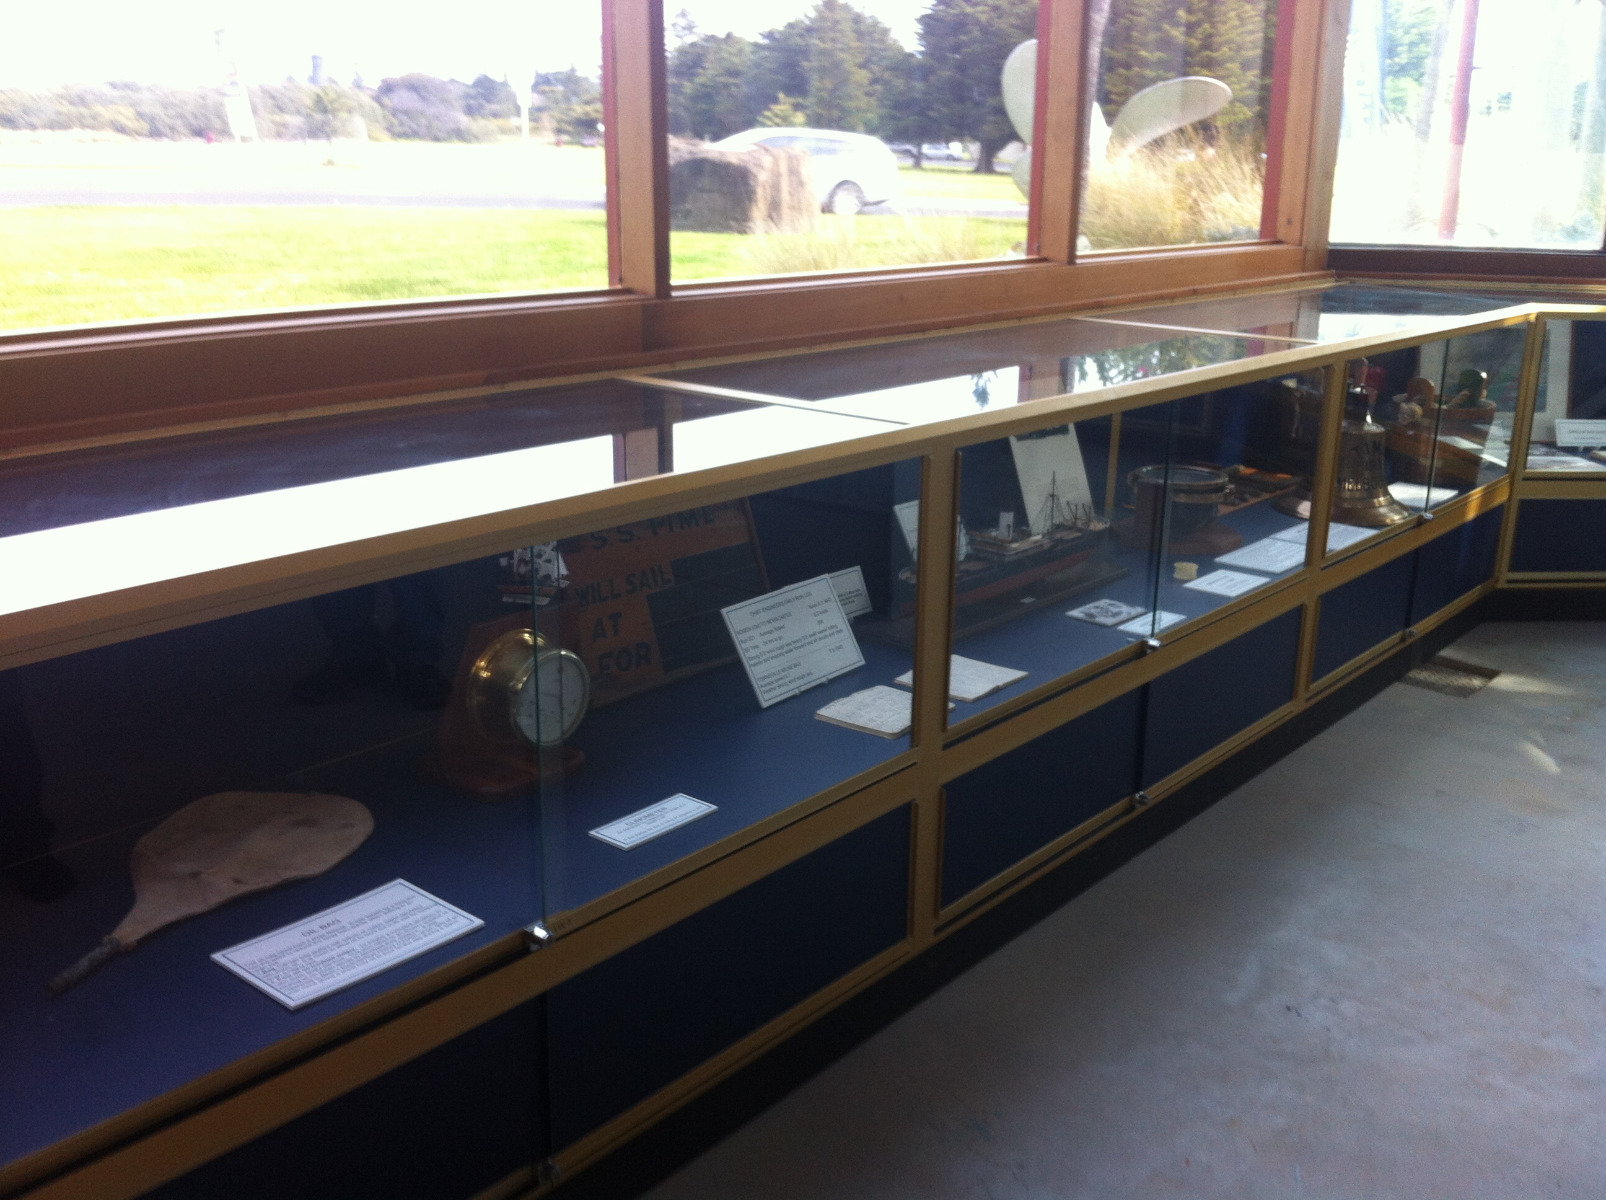 Display counters at the Queenscliffe Maritime Museum, Victoria